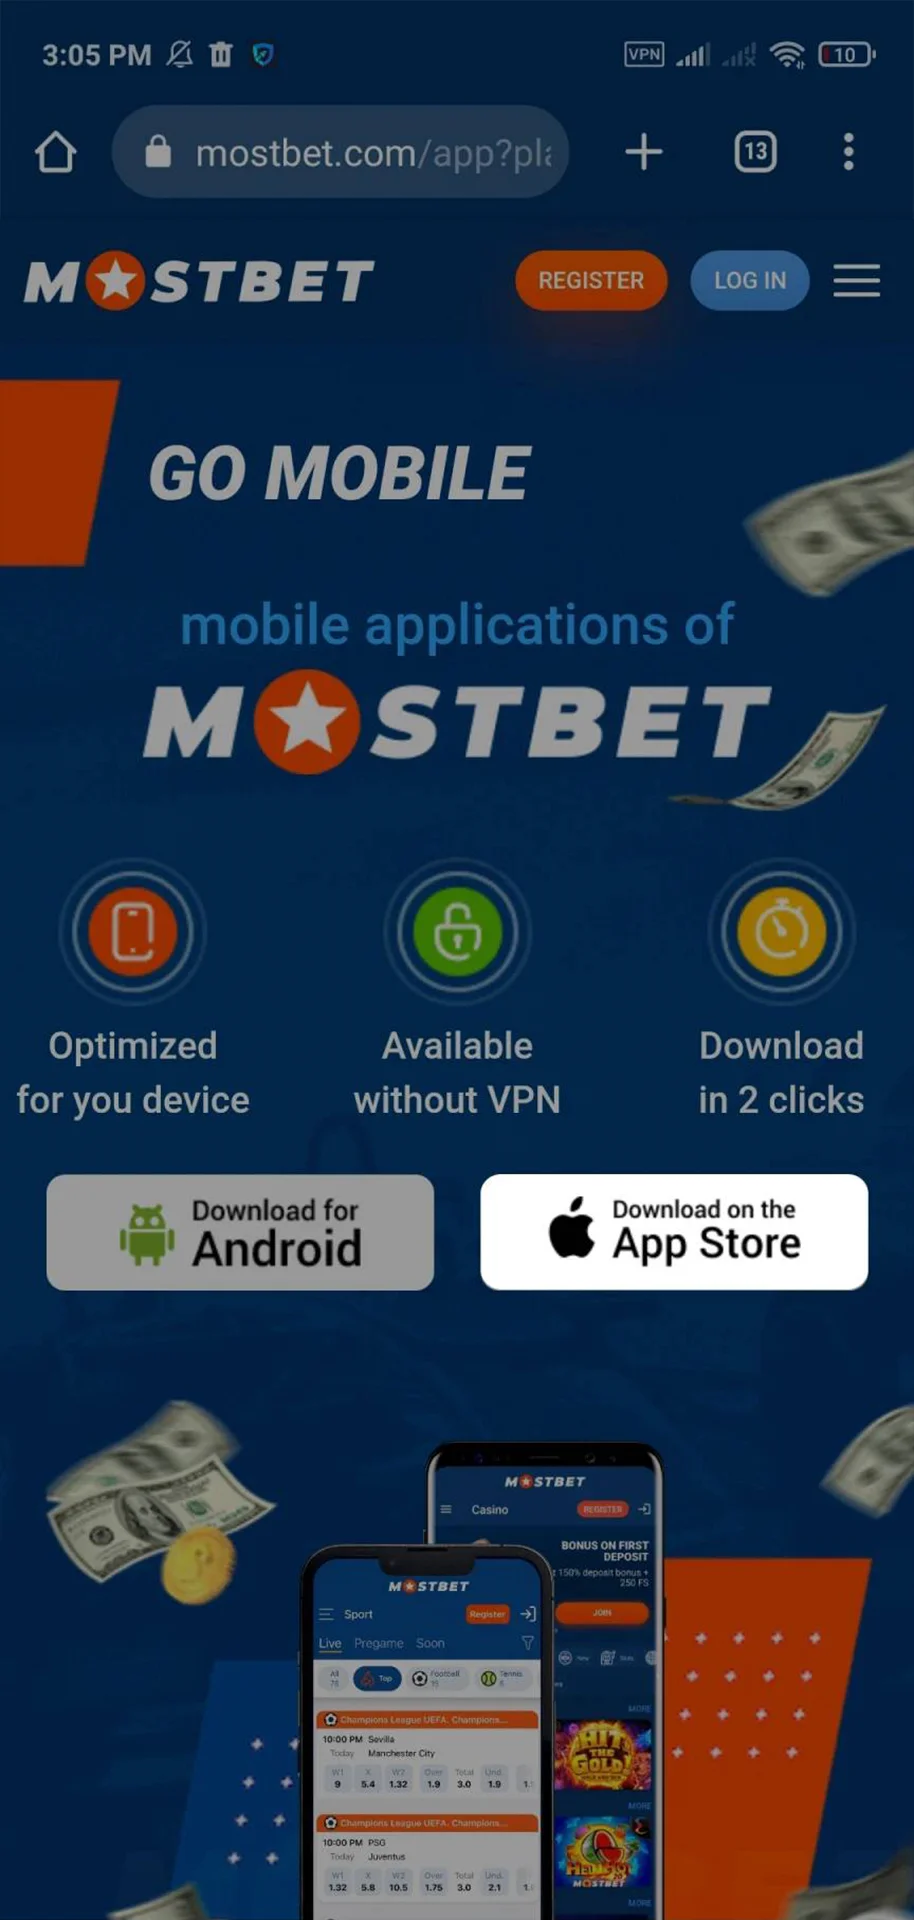 On the Mostbet website, find the section to download the application for iOS.